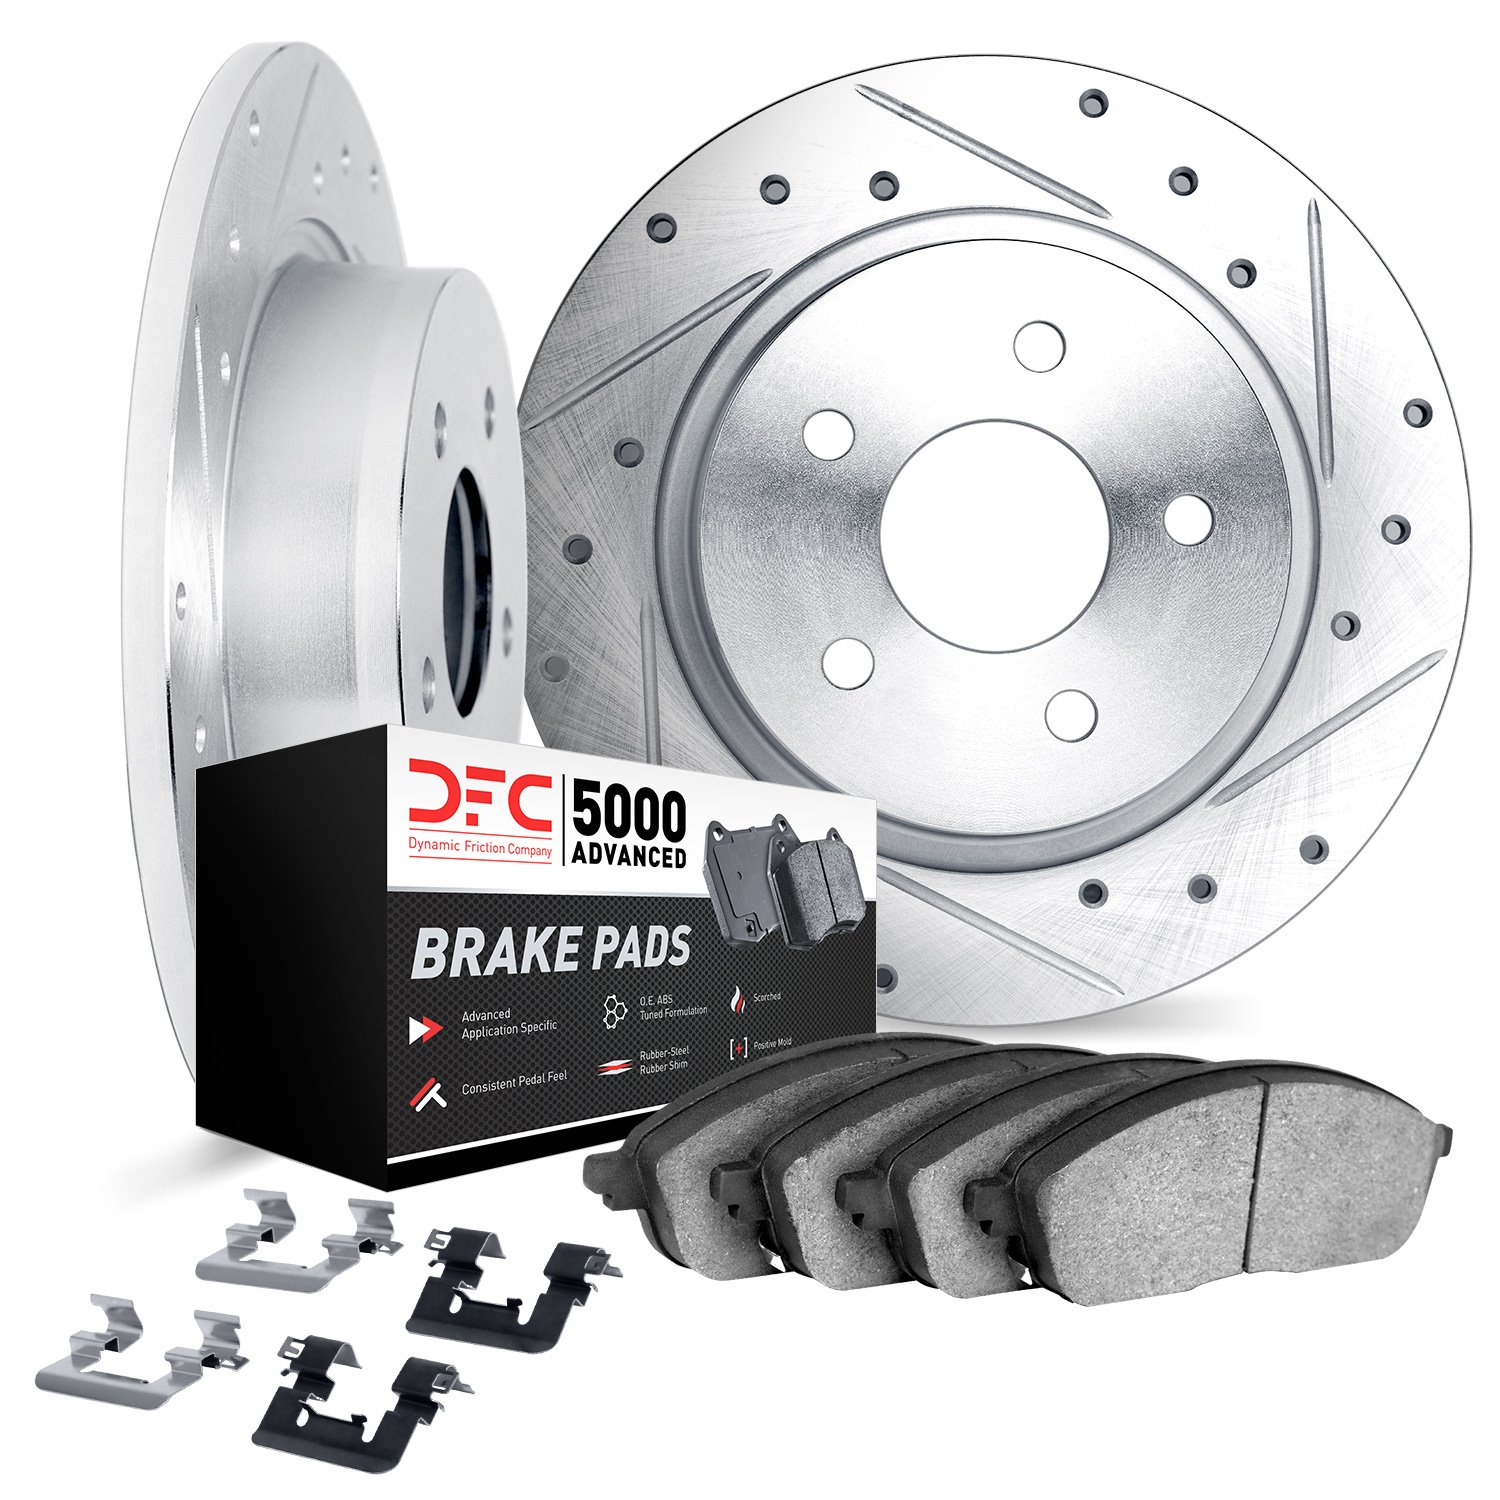 7512-73080 Drilled/Slotted Brake Rotors w/5000 Advanced Brake Pads Kit & Hardware [Silver], Fits Select Audi/Volkswagen, Positio